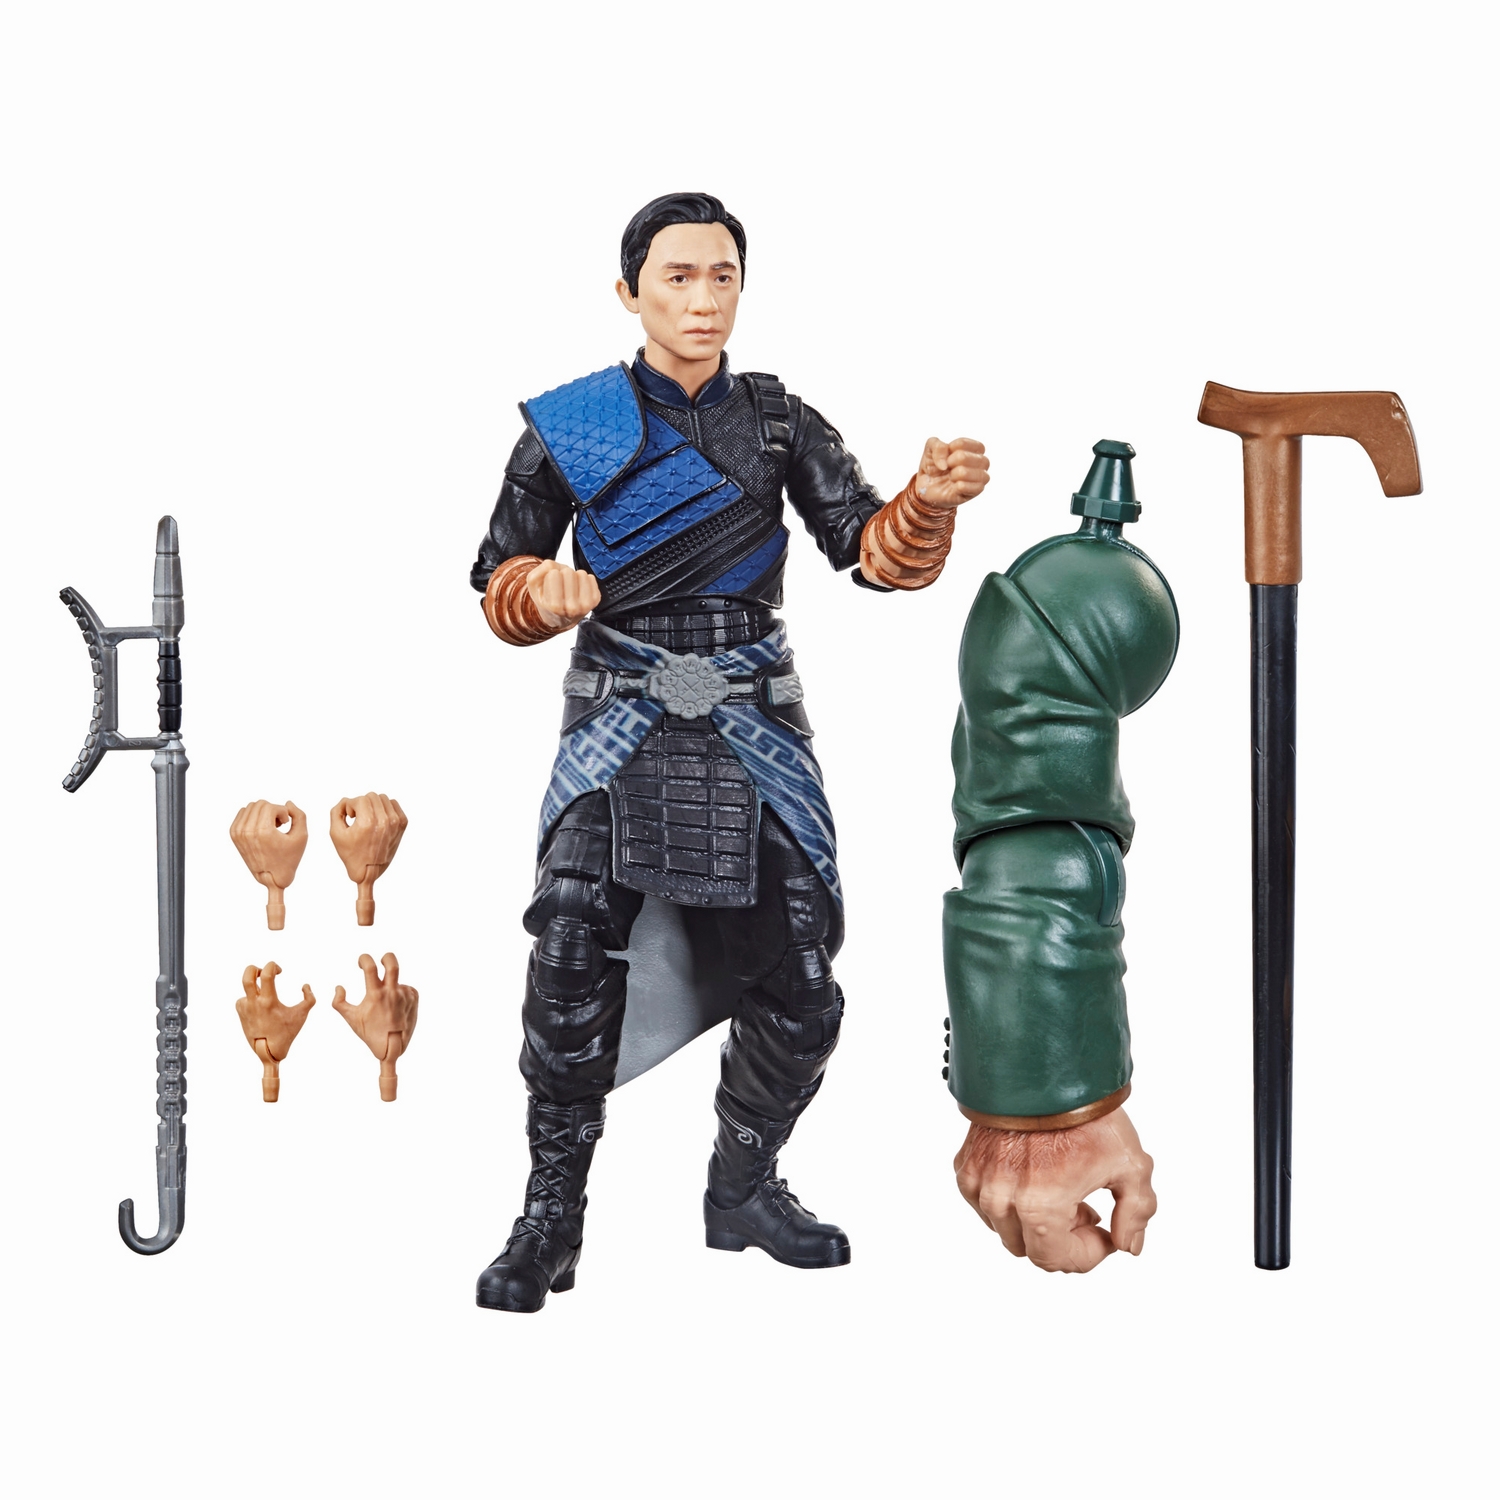 MARVEL LEGENDS SERIES 6-INCH SHANG-CHI AND THE LEGEND OF THE TEN RINGS - Wenwu oop7.jpg